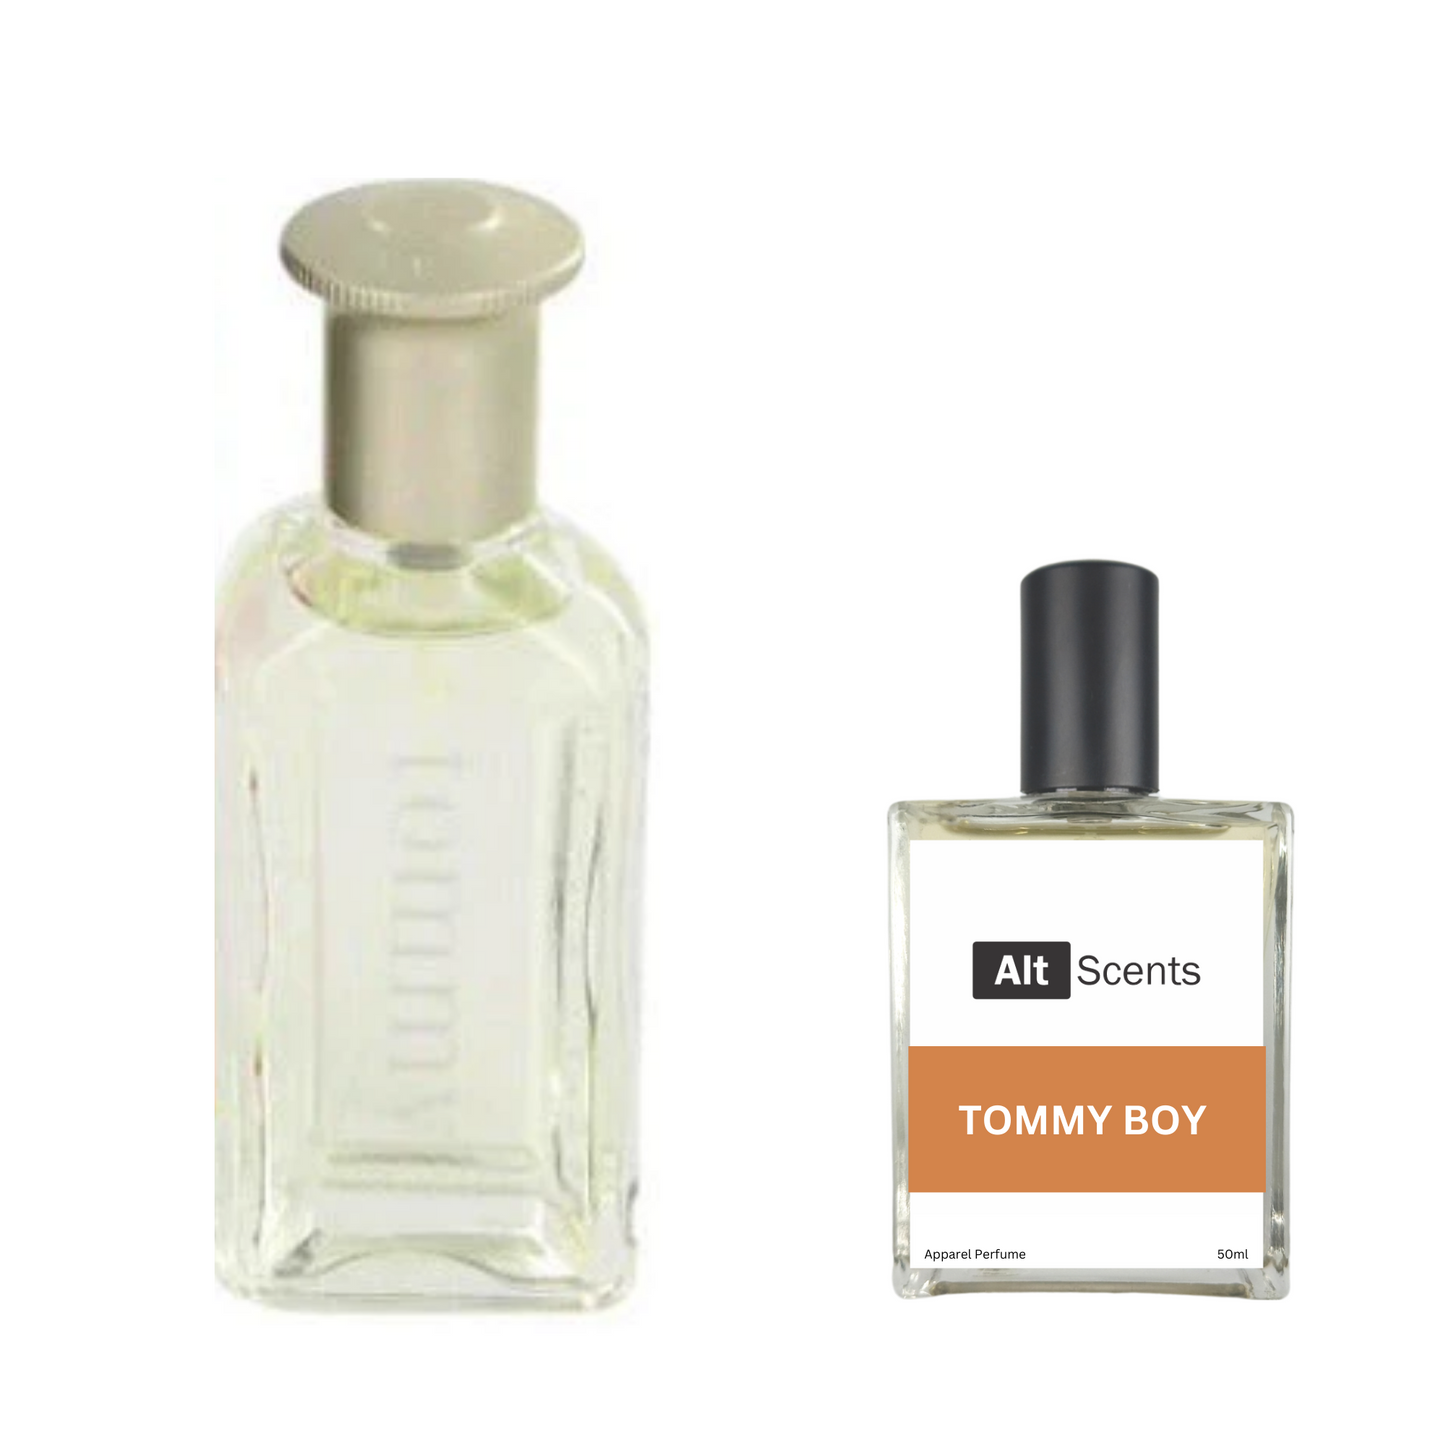 Tommy Boy type Perfume for Men